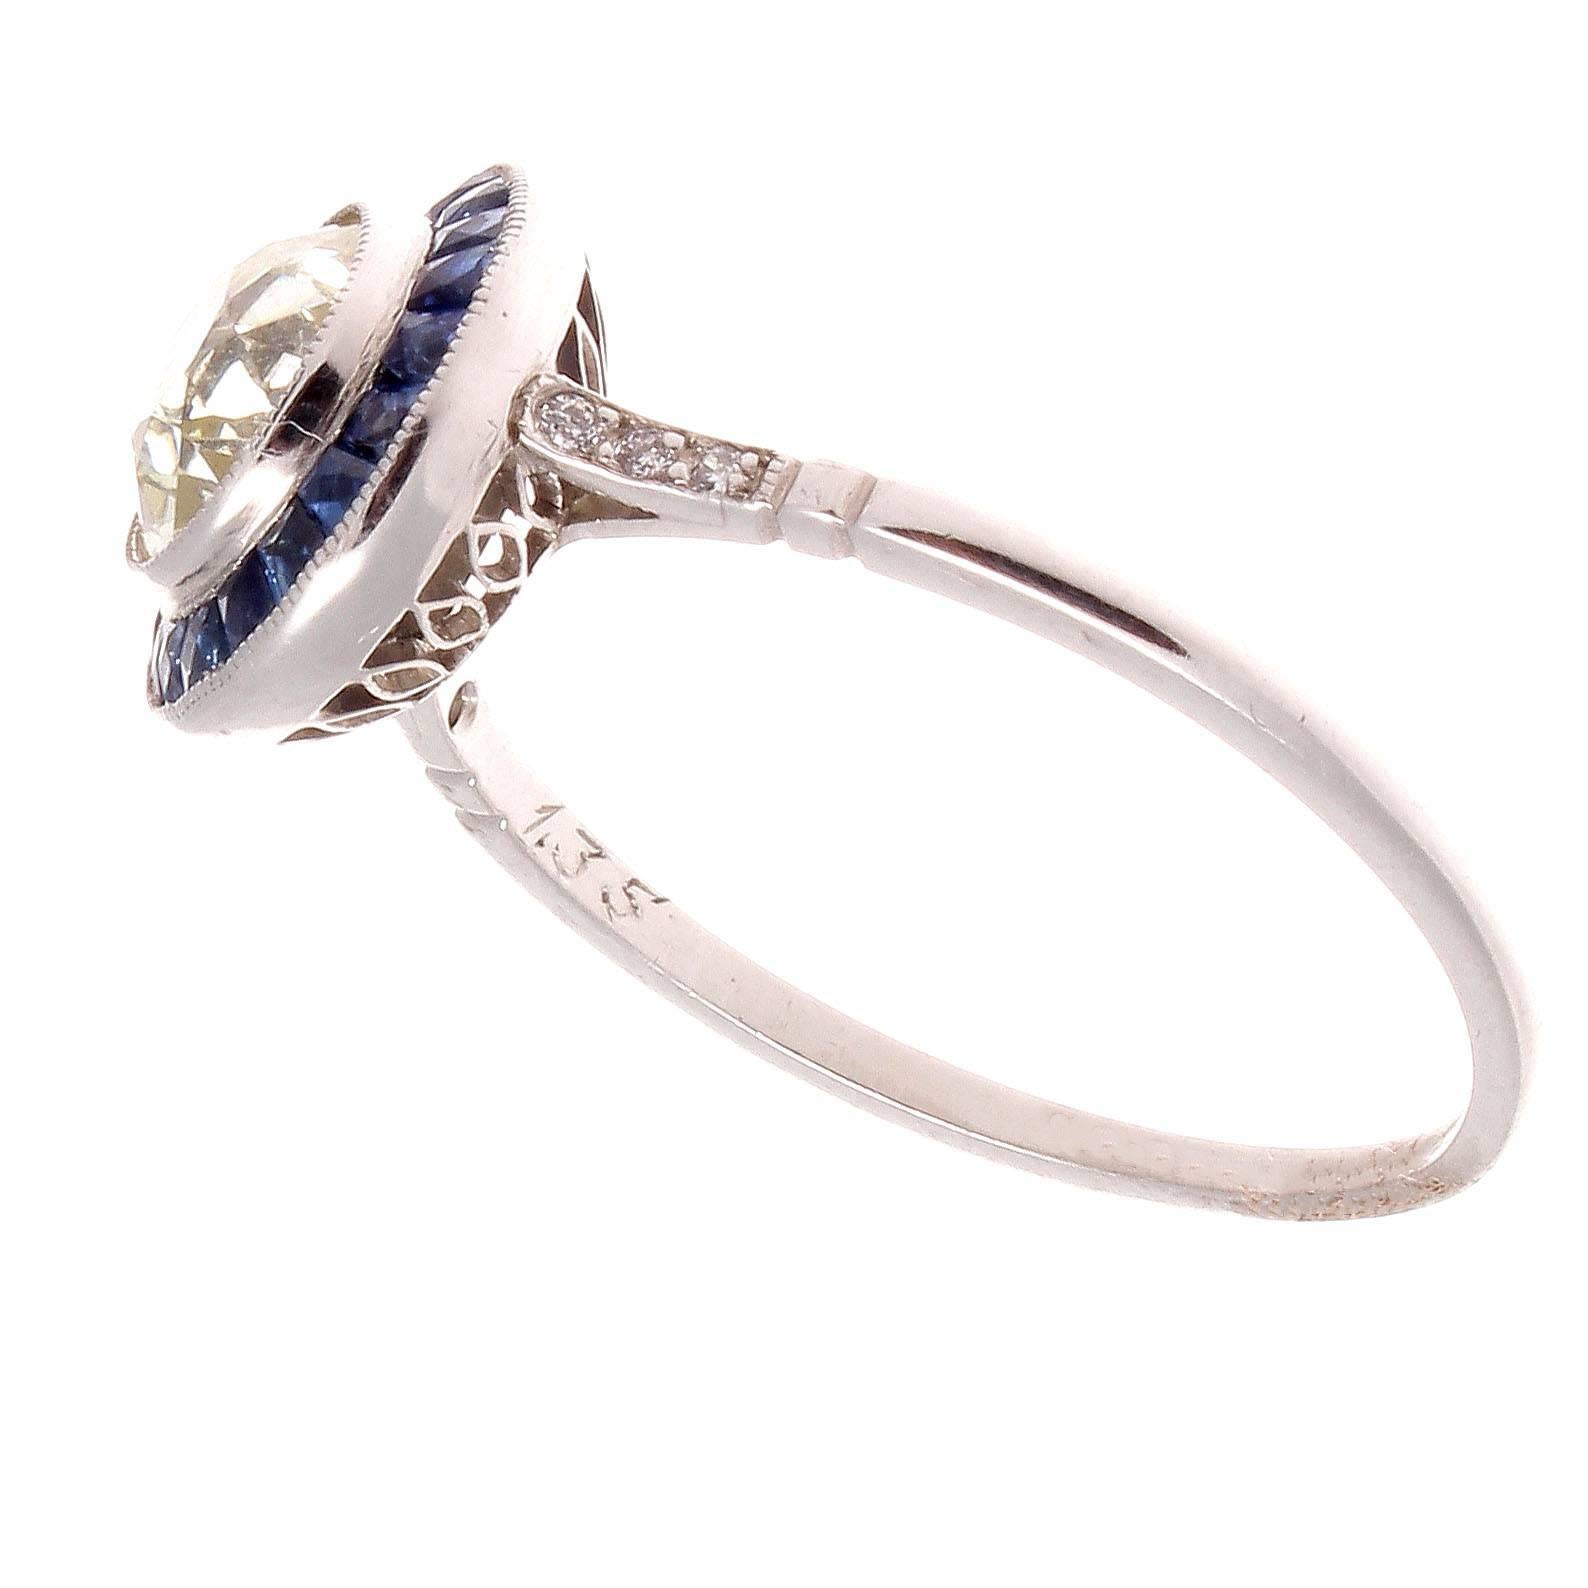 The 1930's is regarded as the golden era of jewelry and has influenced designers to recreate the jewelry from this remarkable time. Featuring a 1.35 carat diamond that is surrounded by a halo of navy blue sapphires. Crafted in platinum.